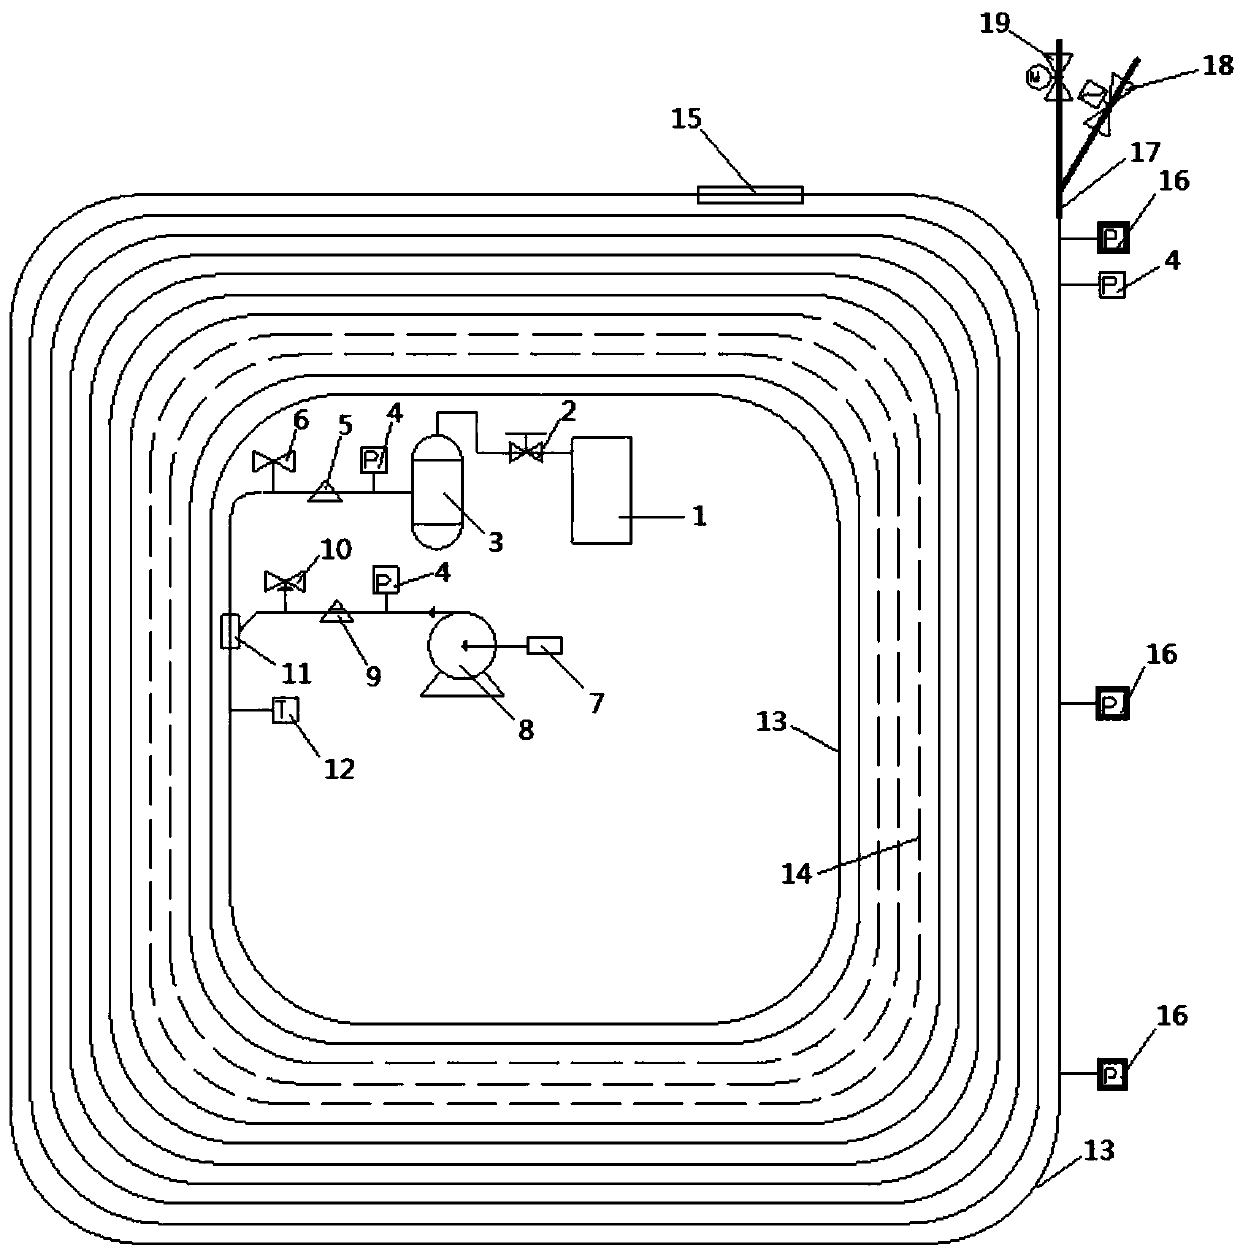 Experiment system for pipeline blockage detection with pressure wave method